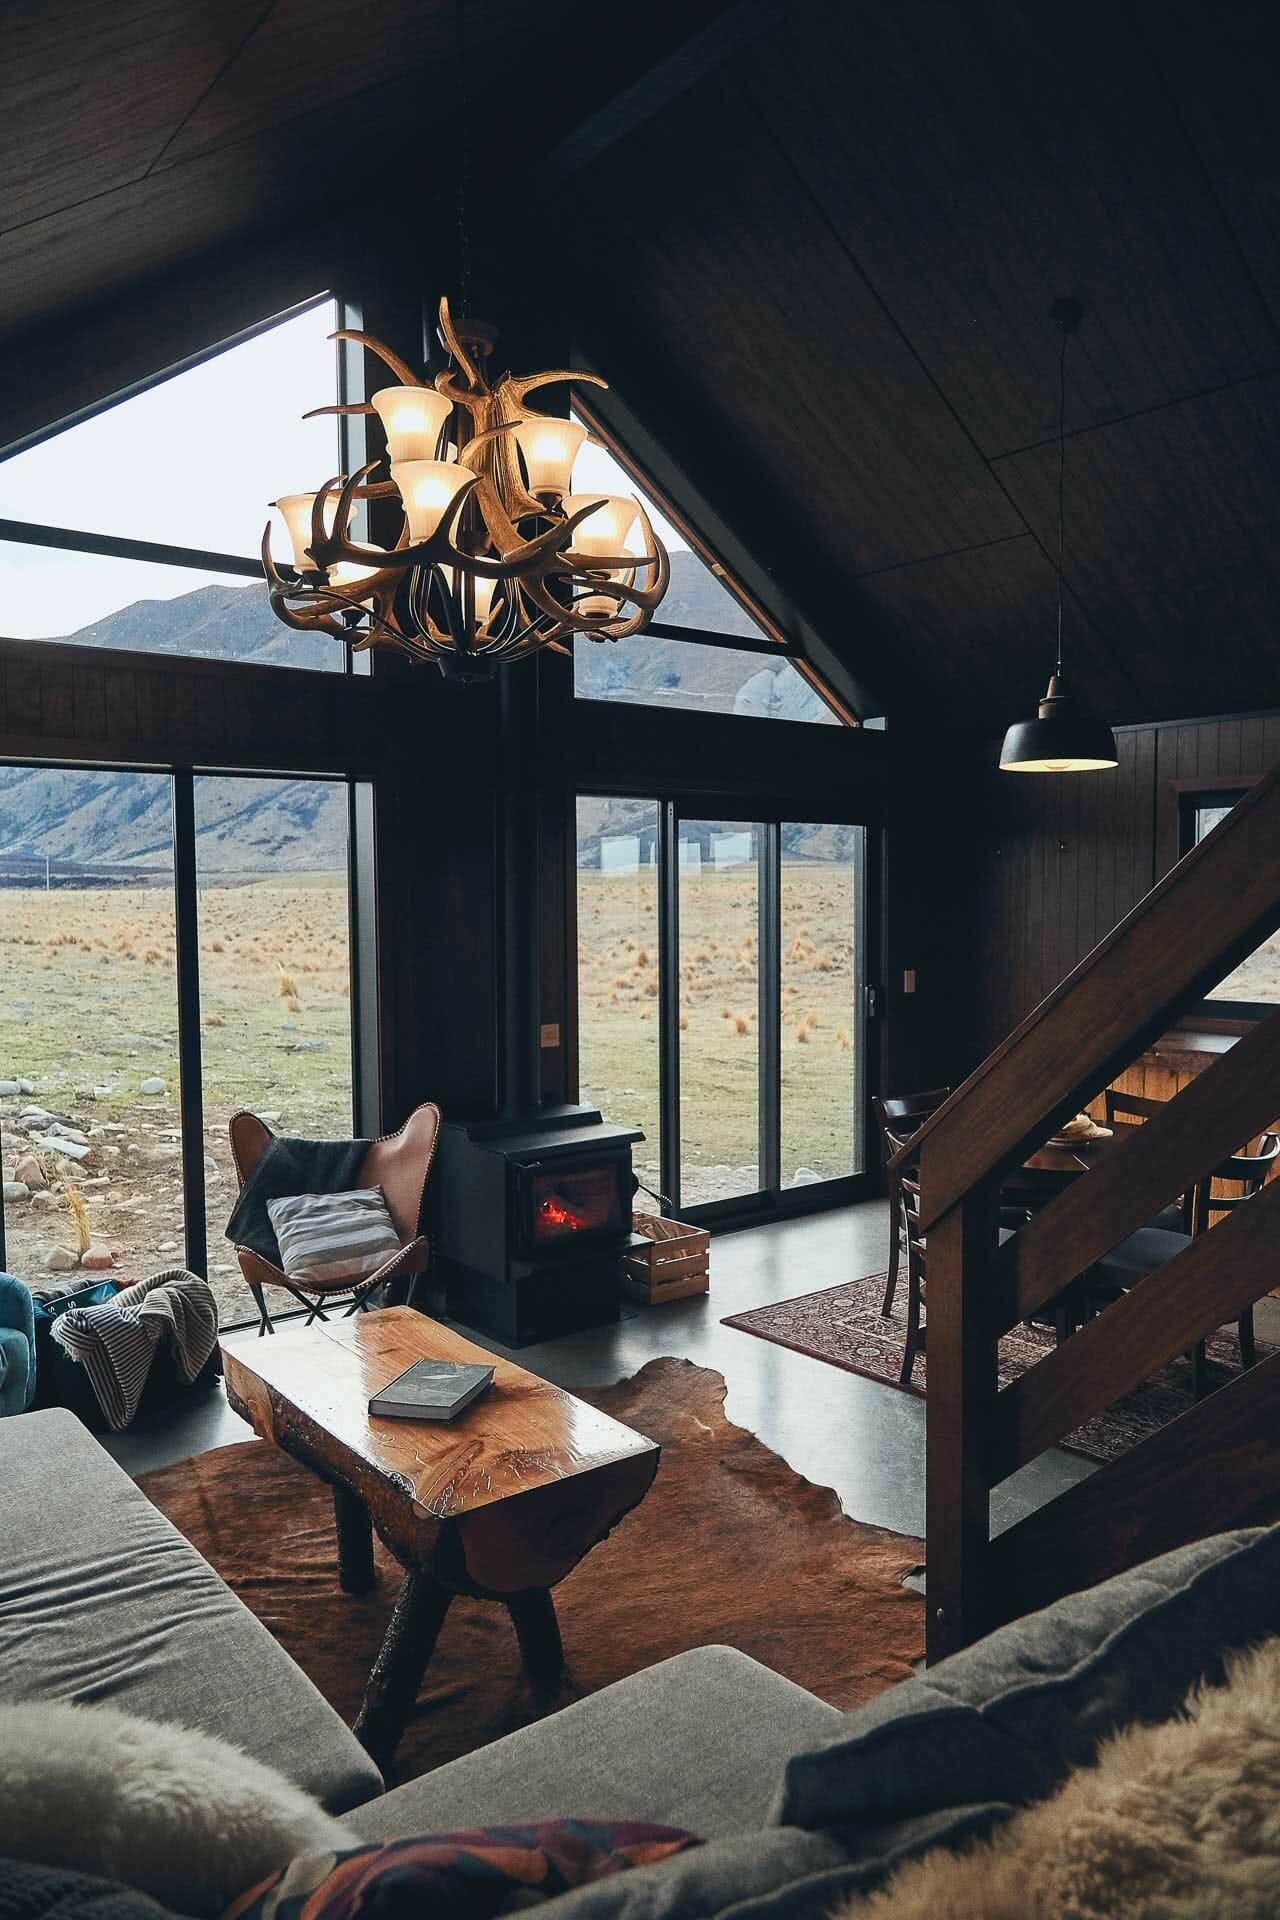 This High Country Cabin Offers the Wild Isolation We All Need Right Now, photo by Kenny Smith, cabin, isolation, twizel, south island, new zealand, interior